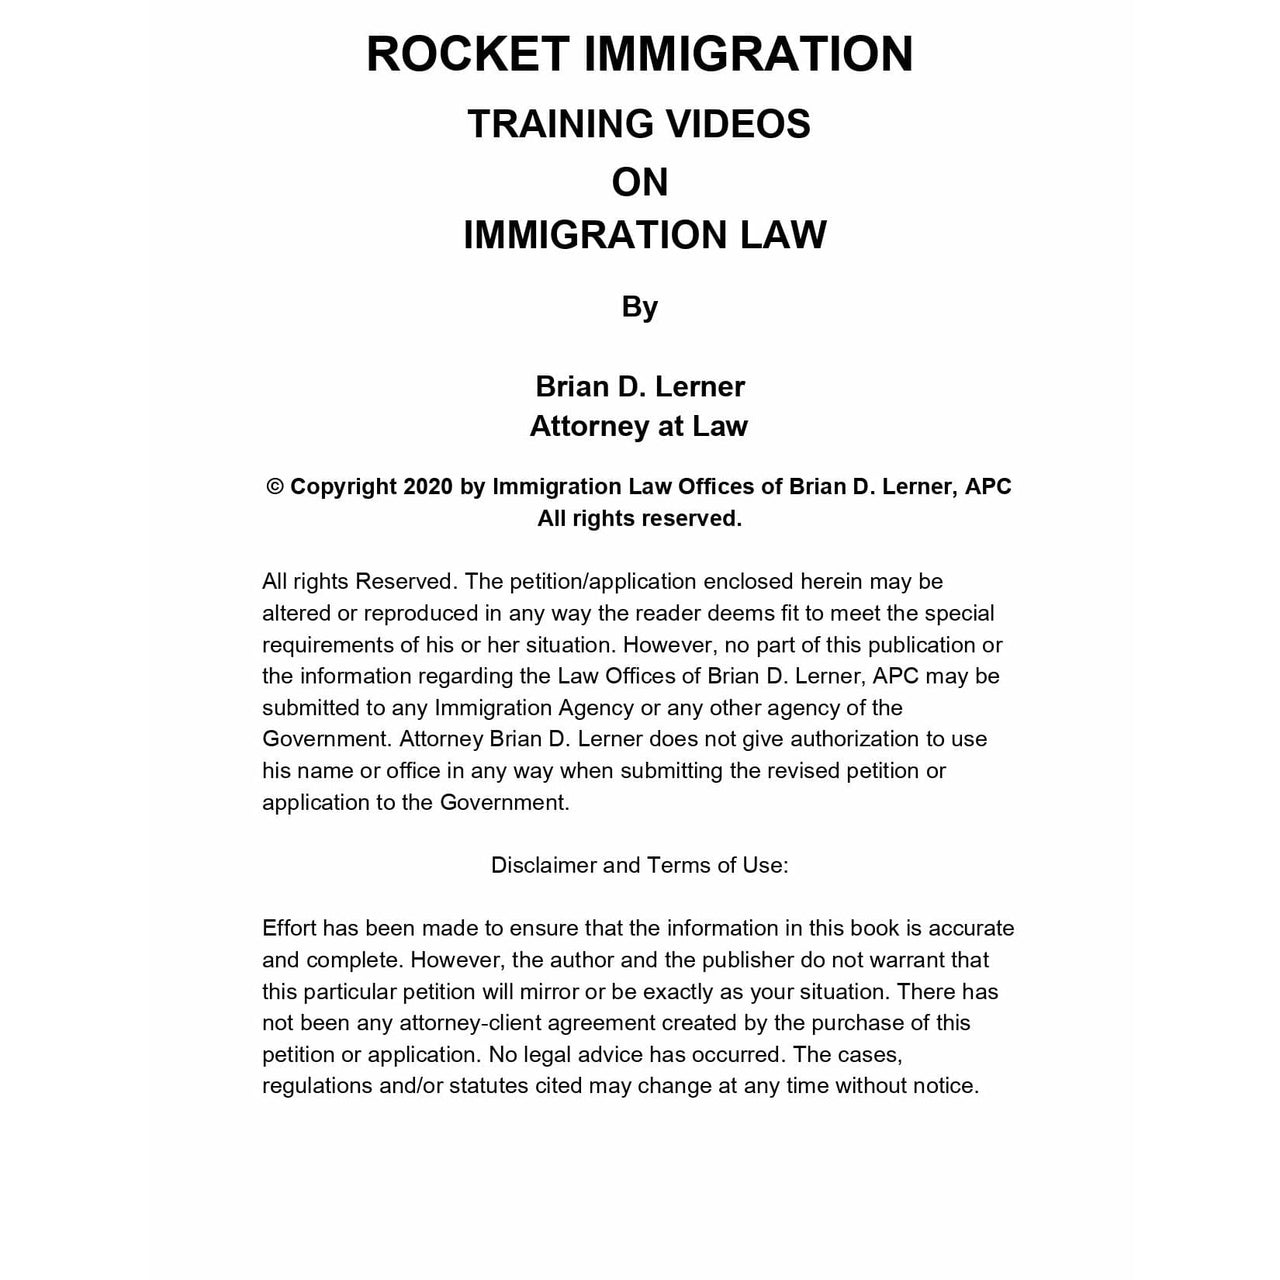 B-2 Visitor Visa Training Course Access Packet - Rocket Immigration Petitions